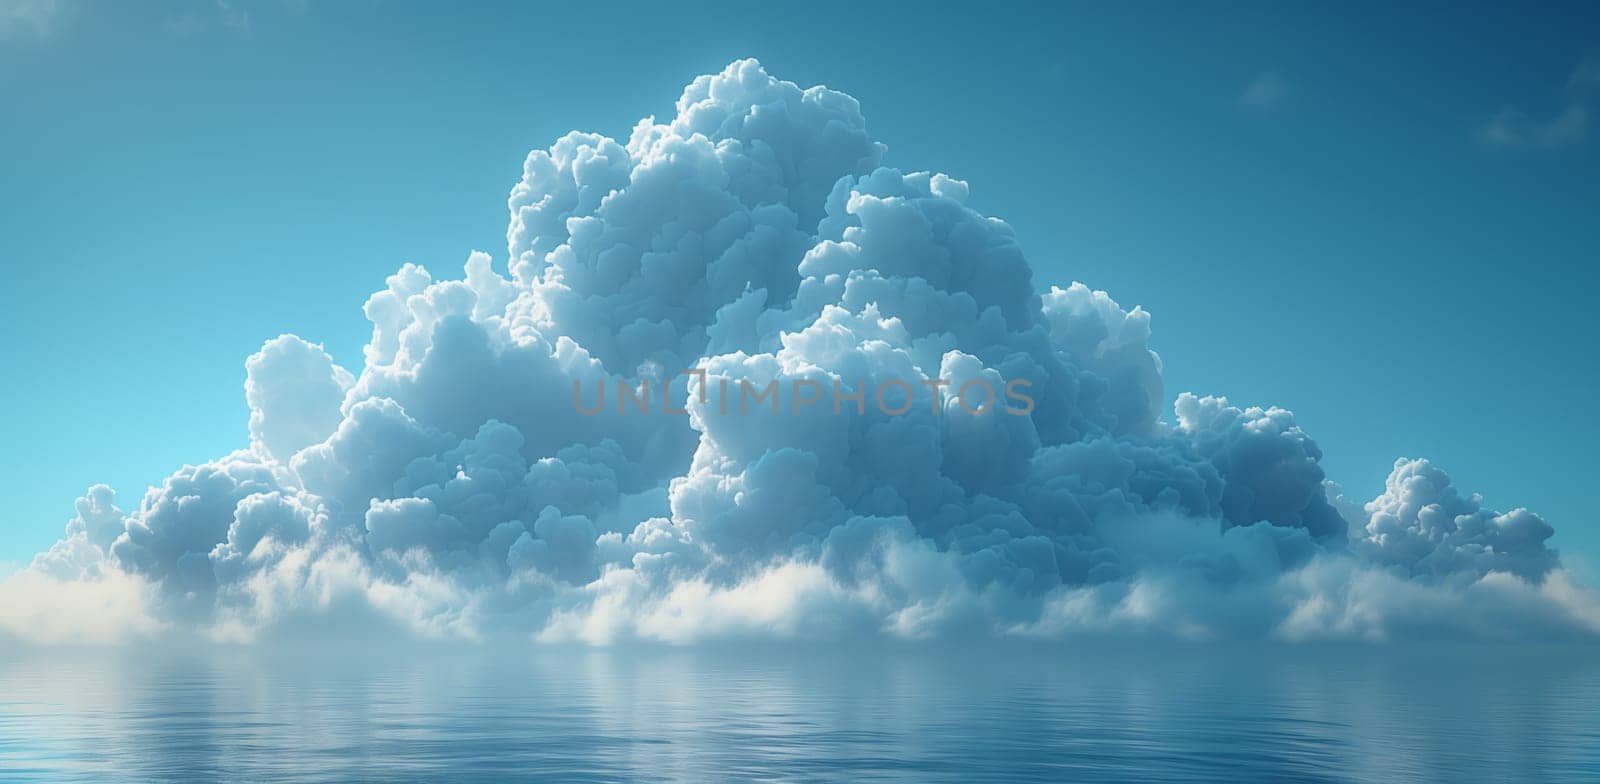 A cumulus cloud hovers above a tranquil lake, blending into the sky and creating a serene natural landscape with water and atmospheric beauty